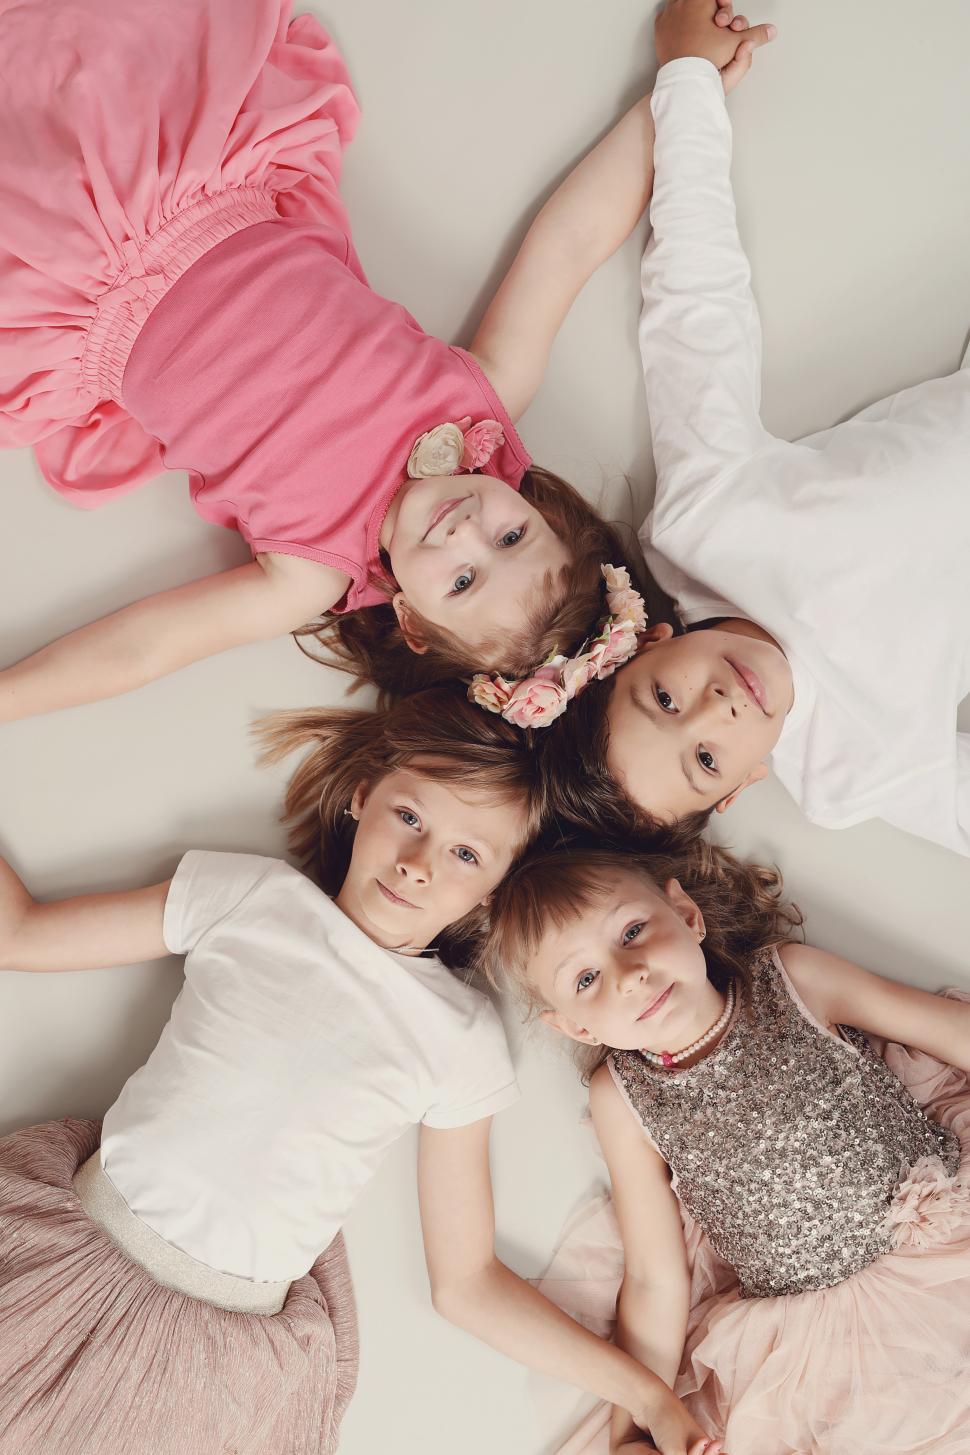 Free Image of Group of kids looking up from the floor 